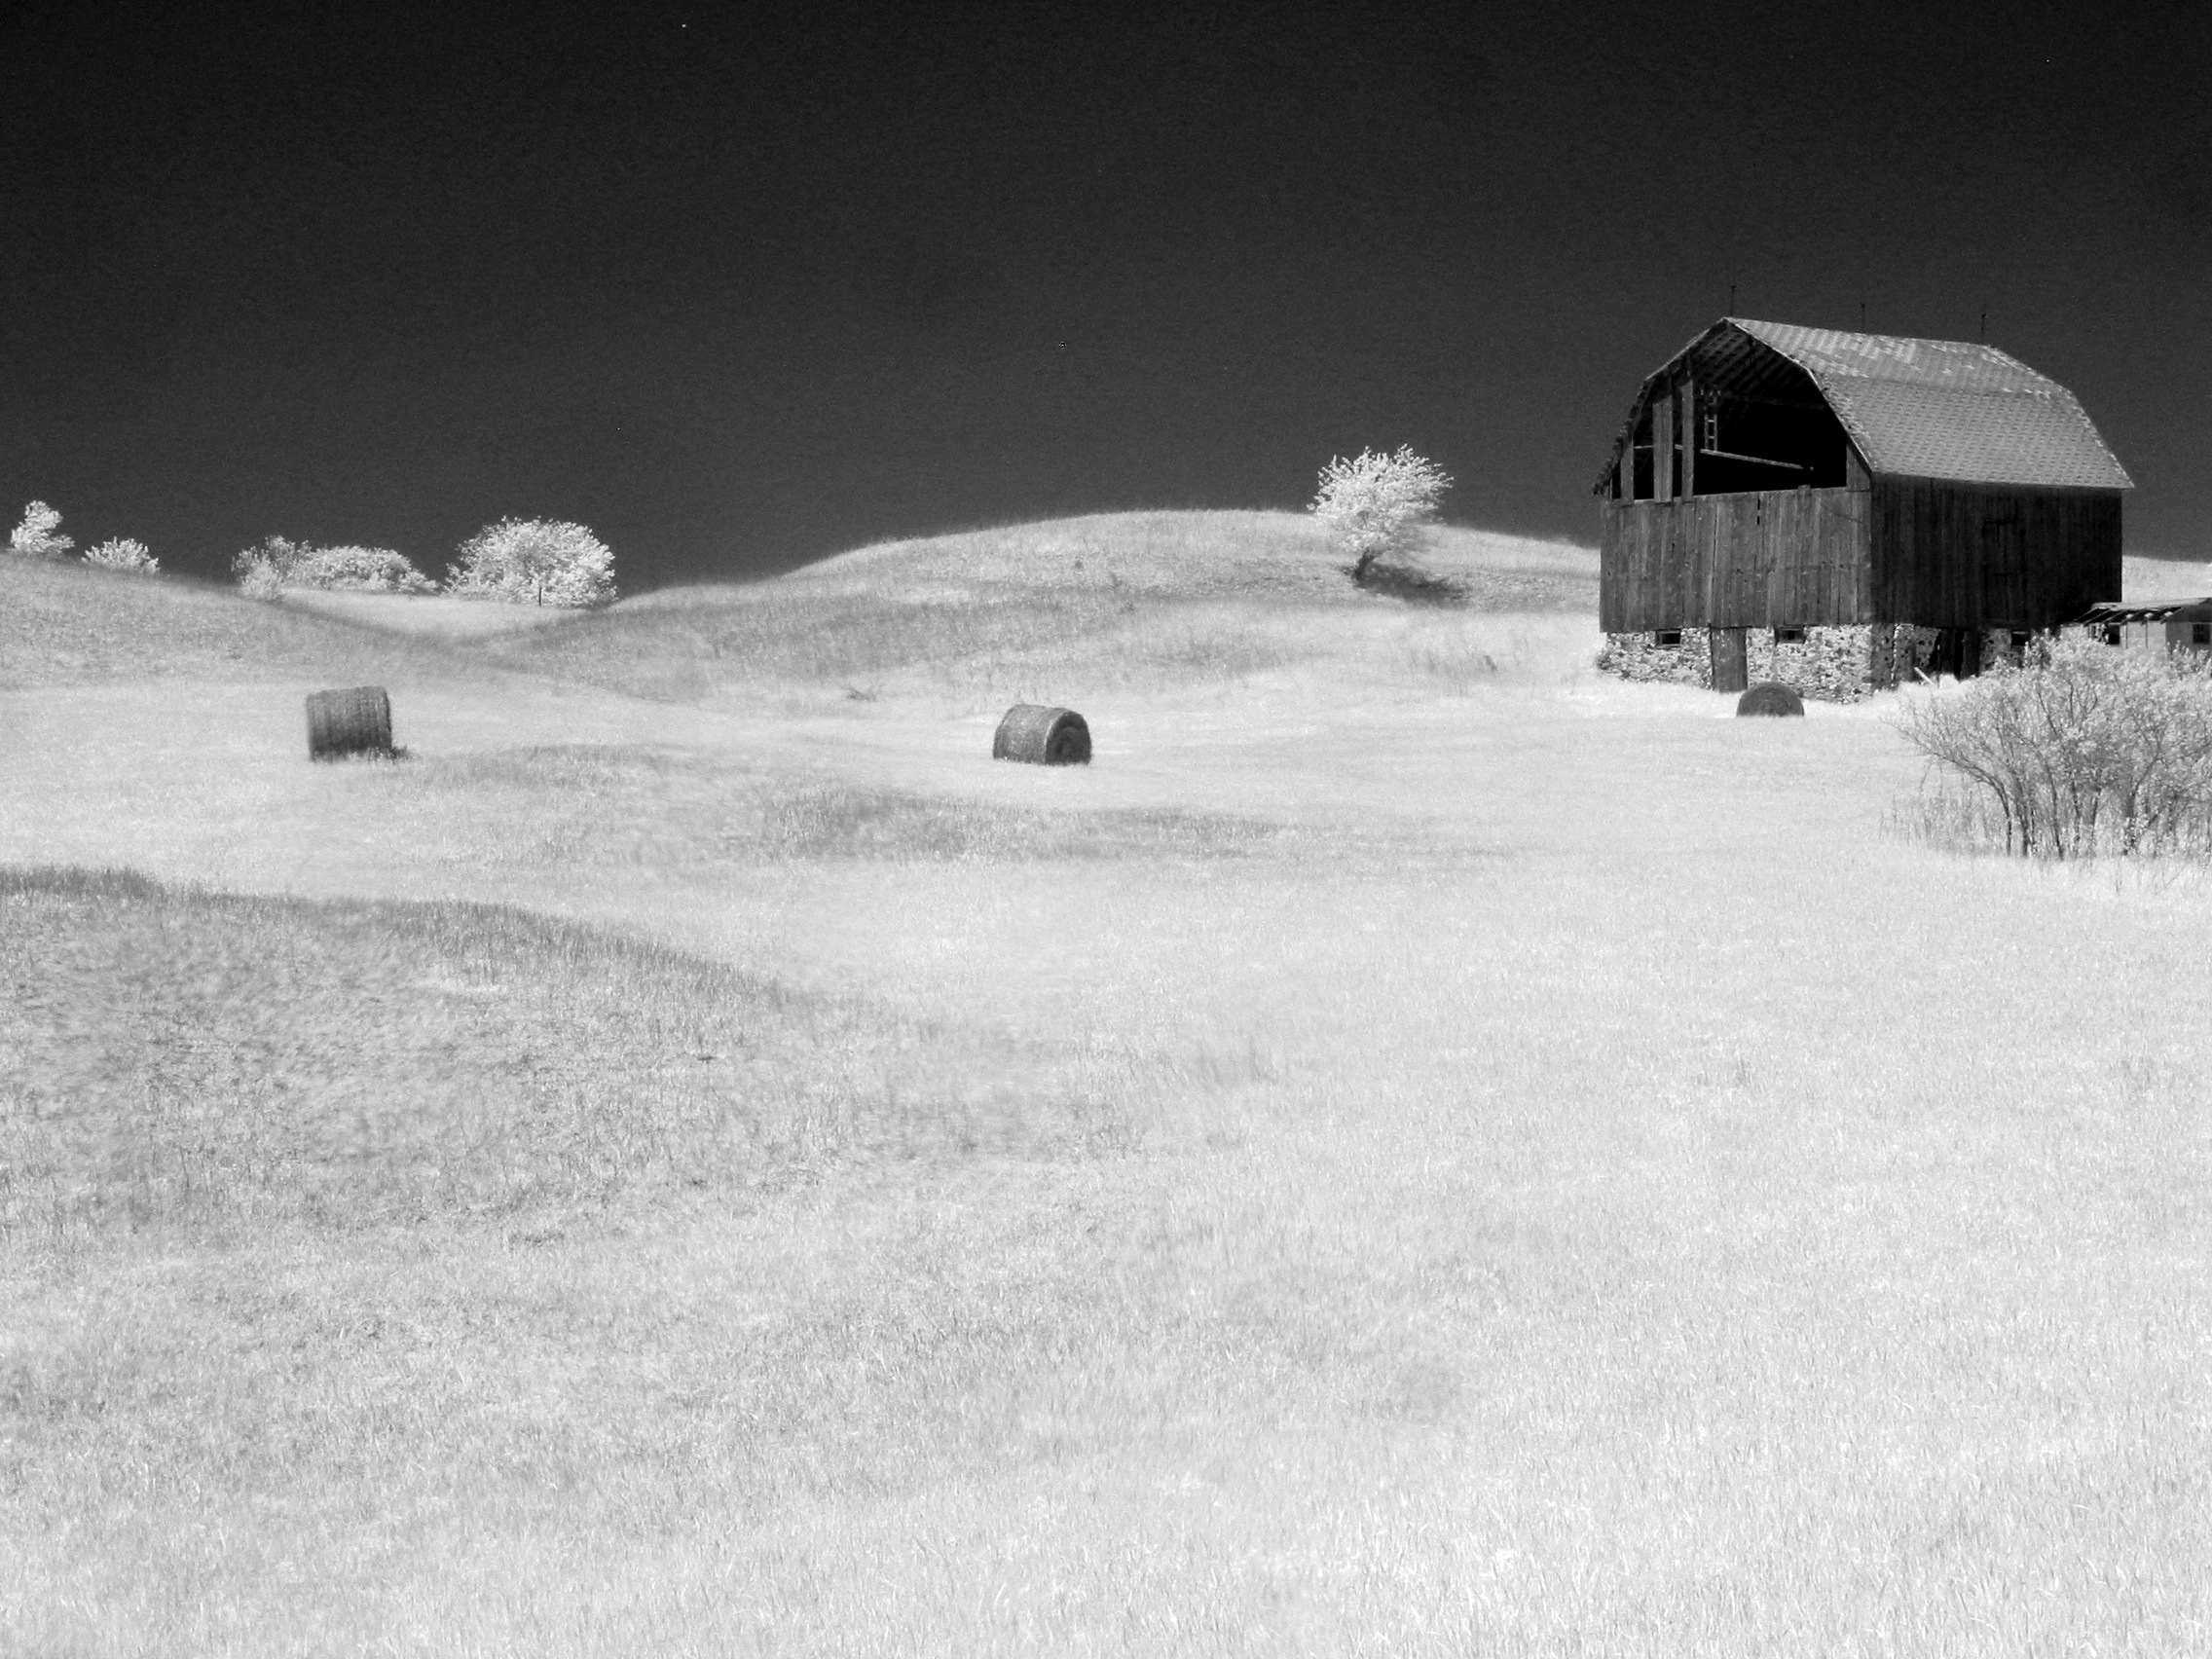 The Barn and Hay Bails